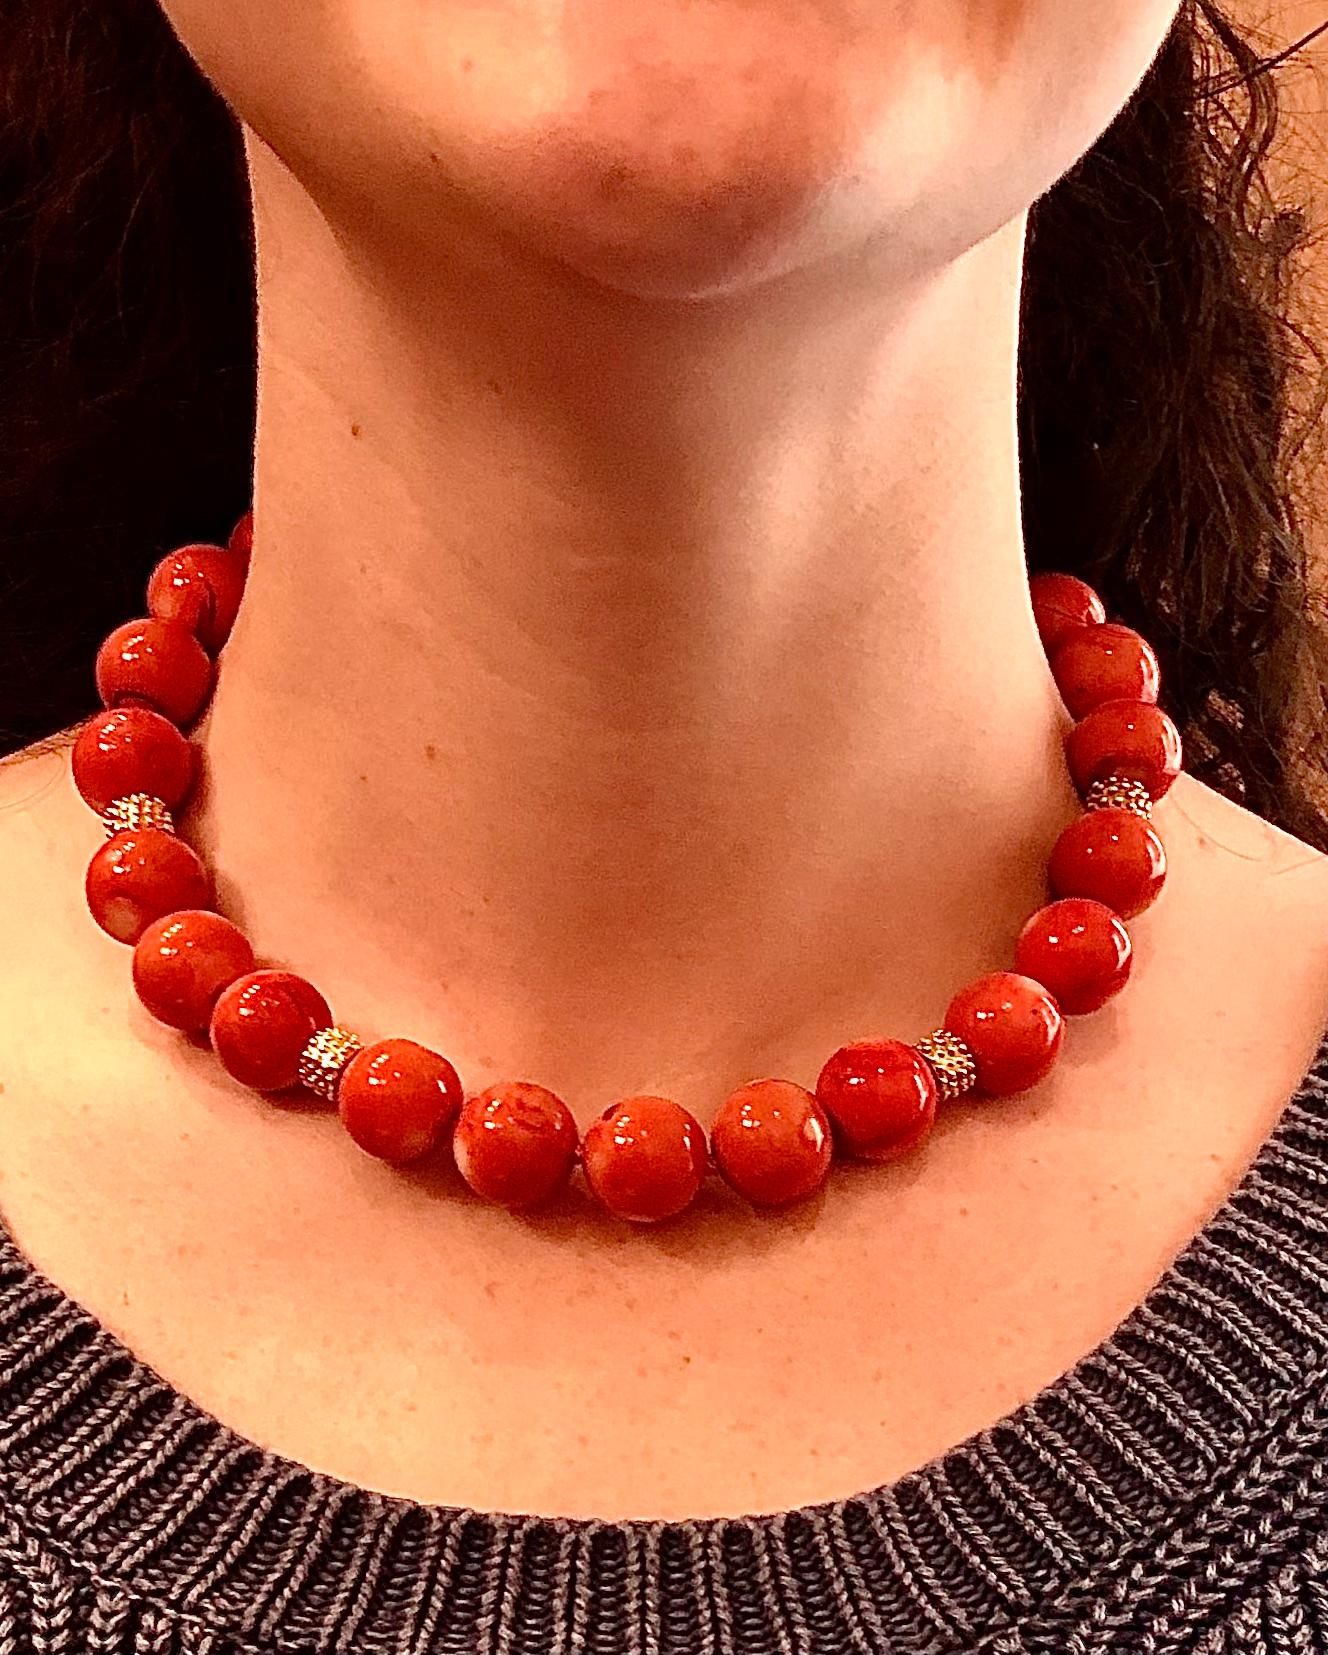 Choker necklace of extraordinarily sized round Momo coral beads with custom made 14kt. gold granulated textured clasp and large rondelles.

Very beautiful and vibrant coral color with subtle white dots and shading inherent in this variety of natural